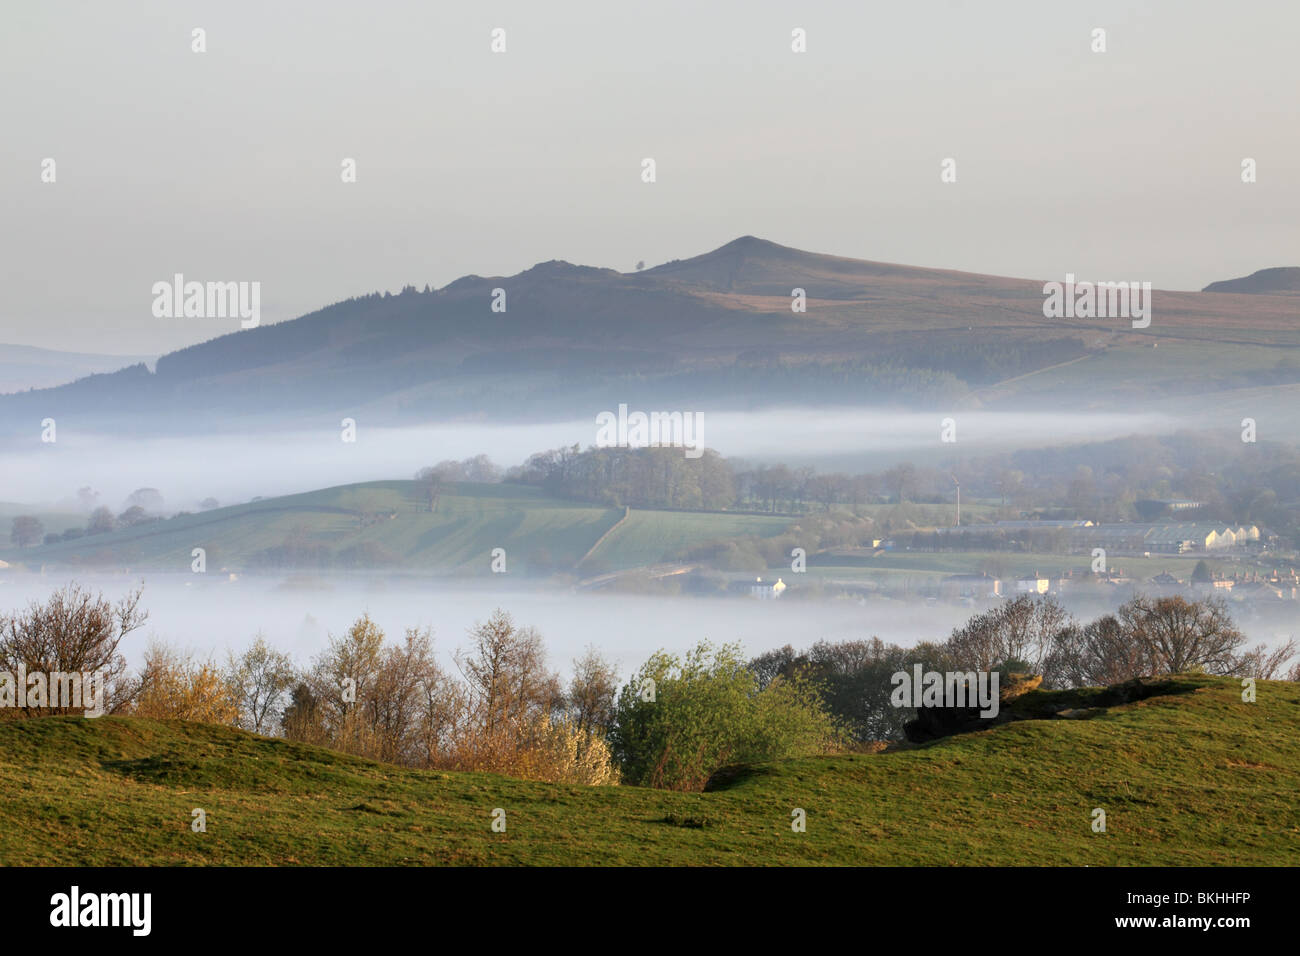 A dawn view of the hill known as Sharp Haw, which lies just within the boundaries of the Yorkshire Dales national par, near Skipton in North Yorkshire Stock Photo